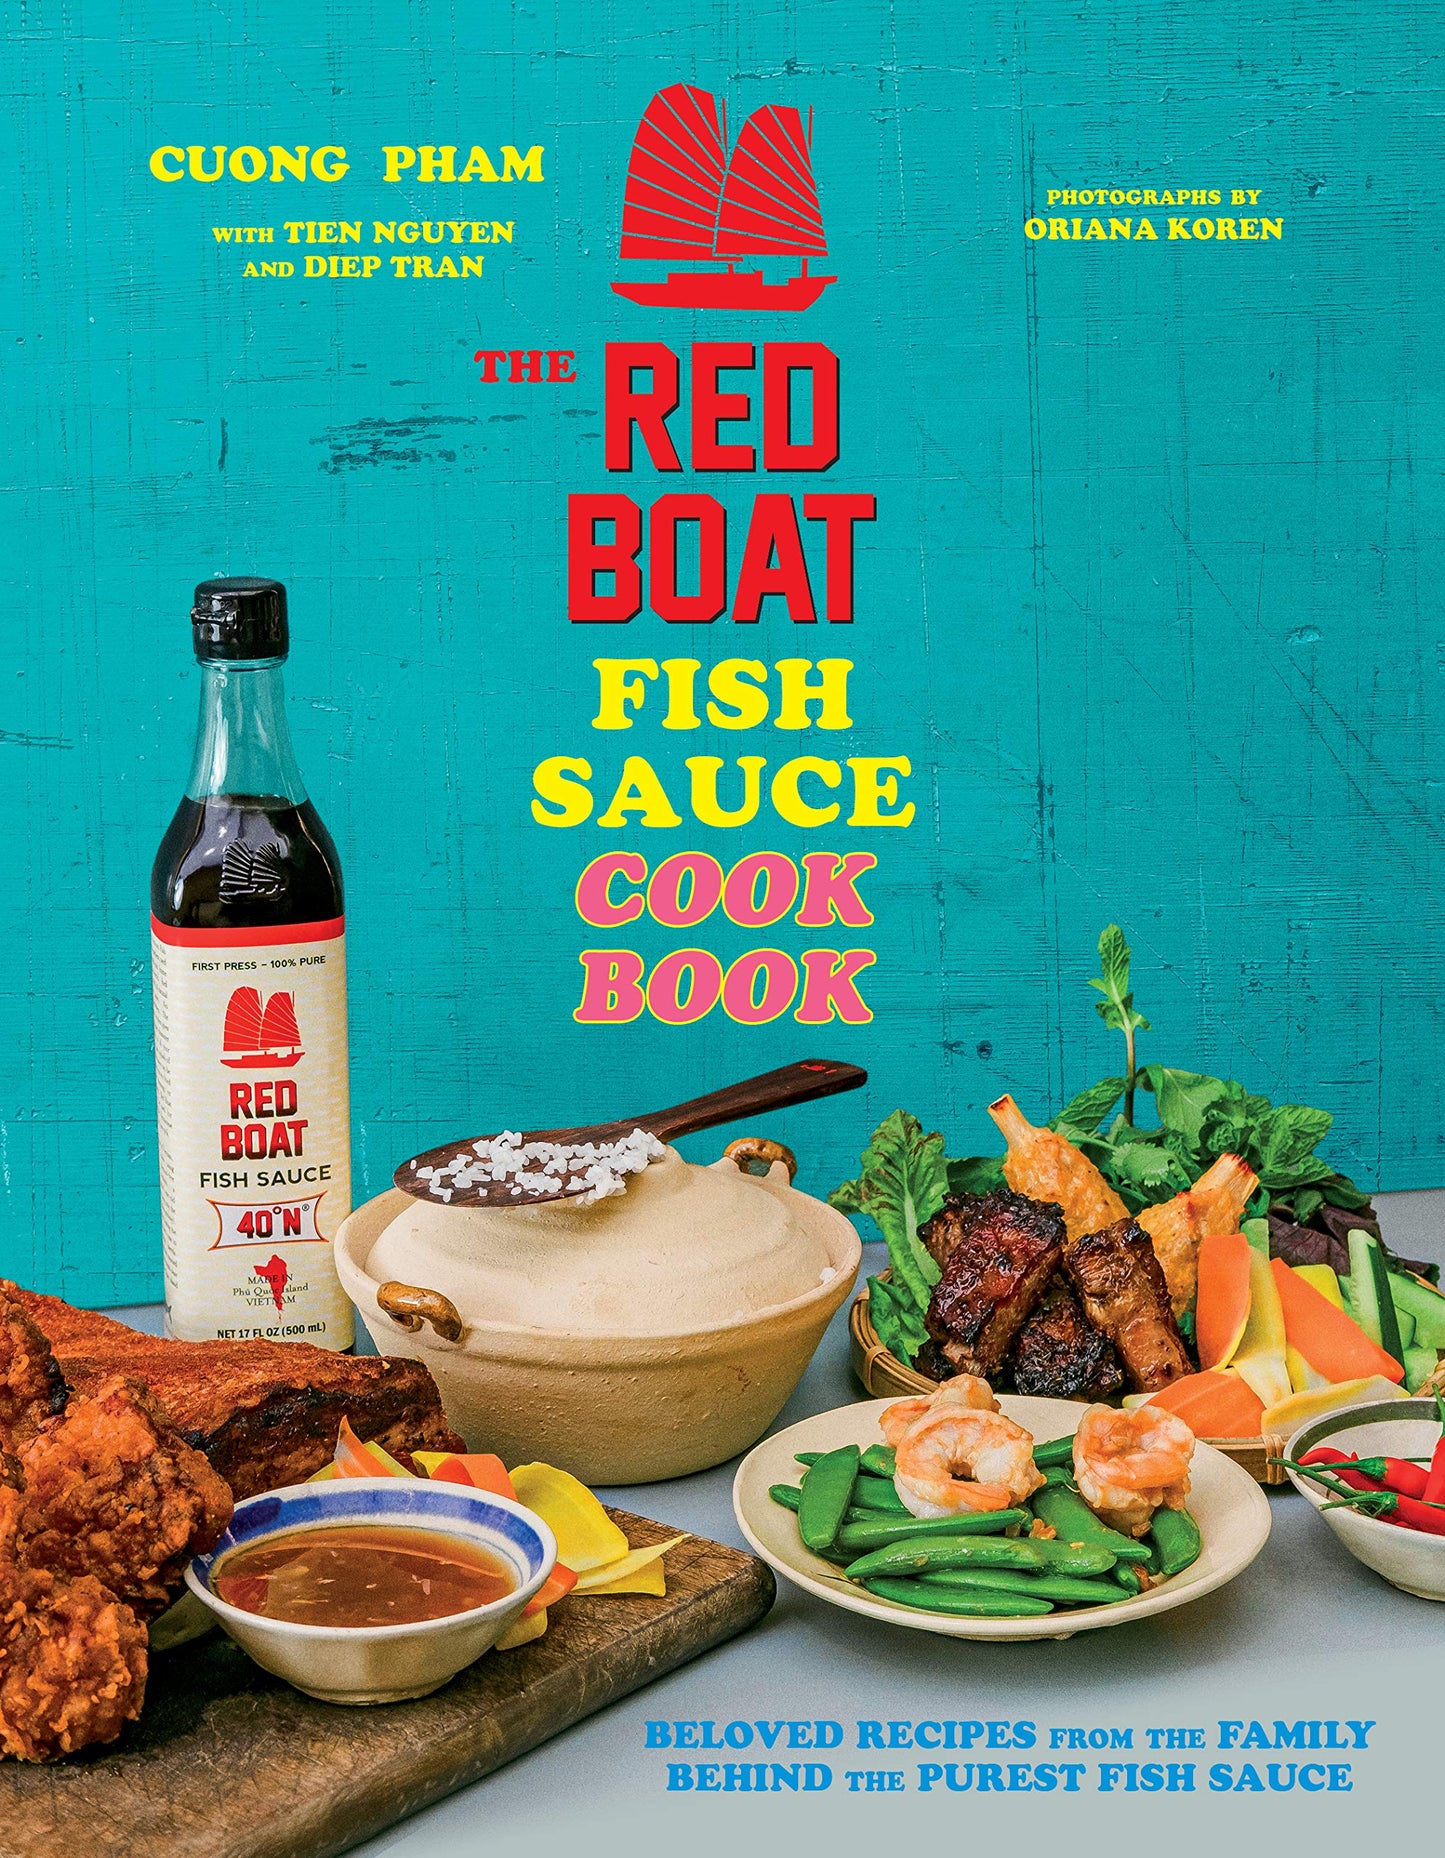 The Red Boat Fish Sauce Cookbook // Beloved Recipes from the Family Behind the Purest Fish Sauce